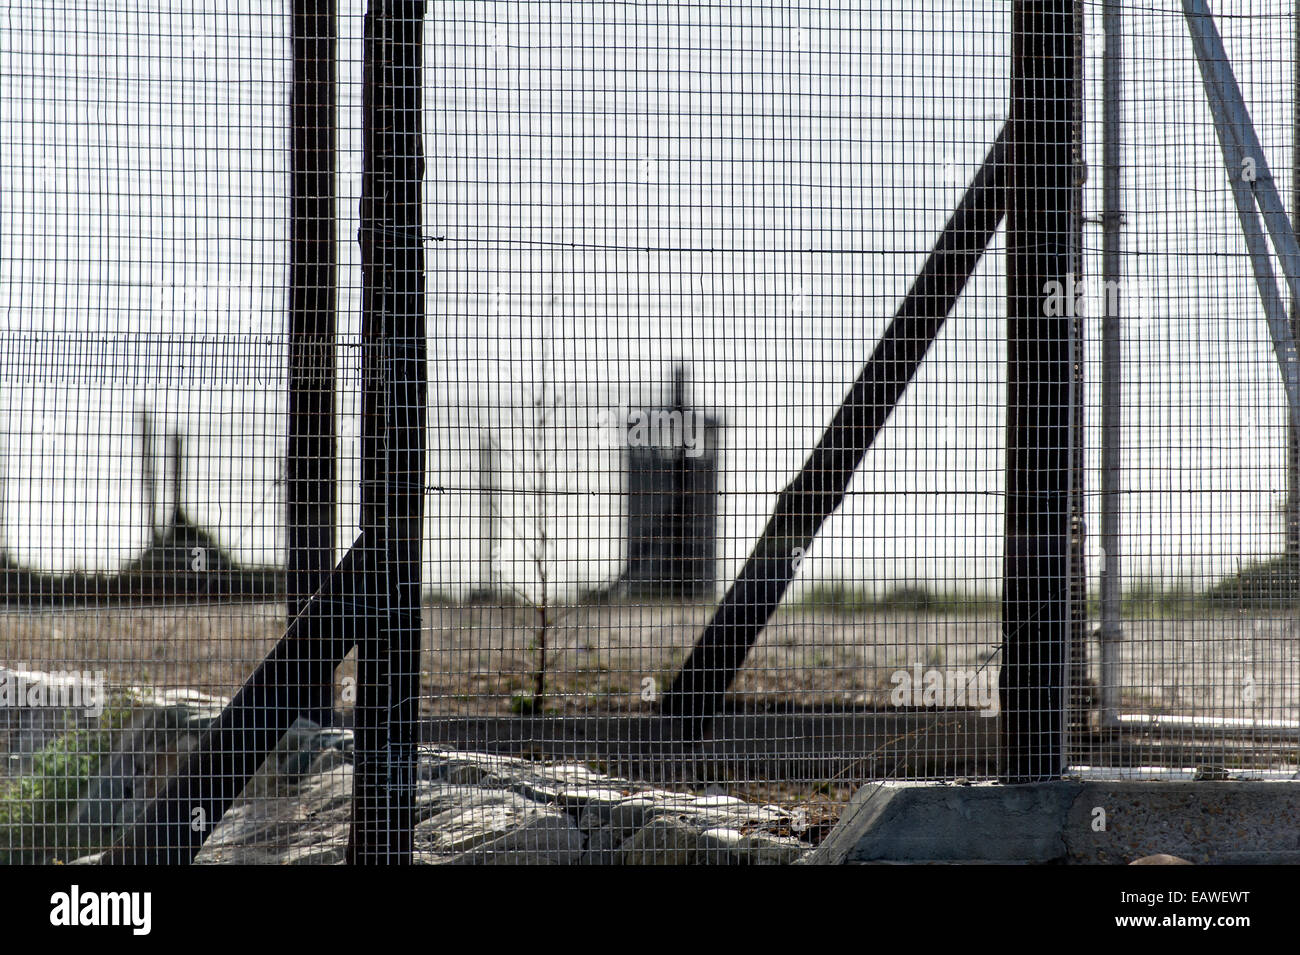 Rows of steel and wire mesh fencing surround a prison and guard tower. Stock Photo